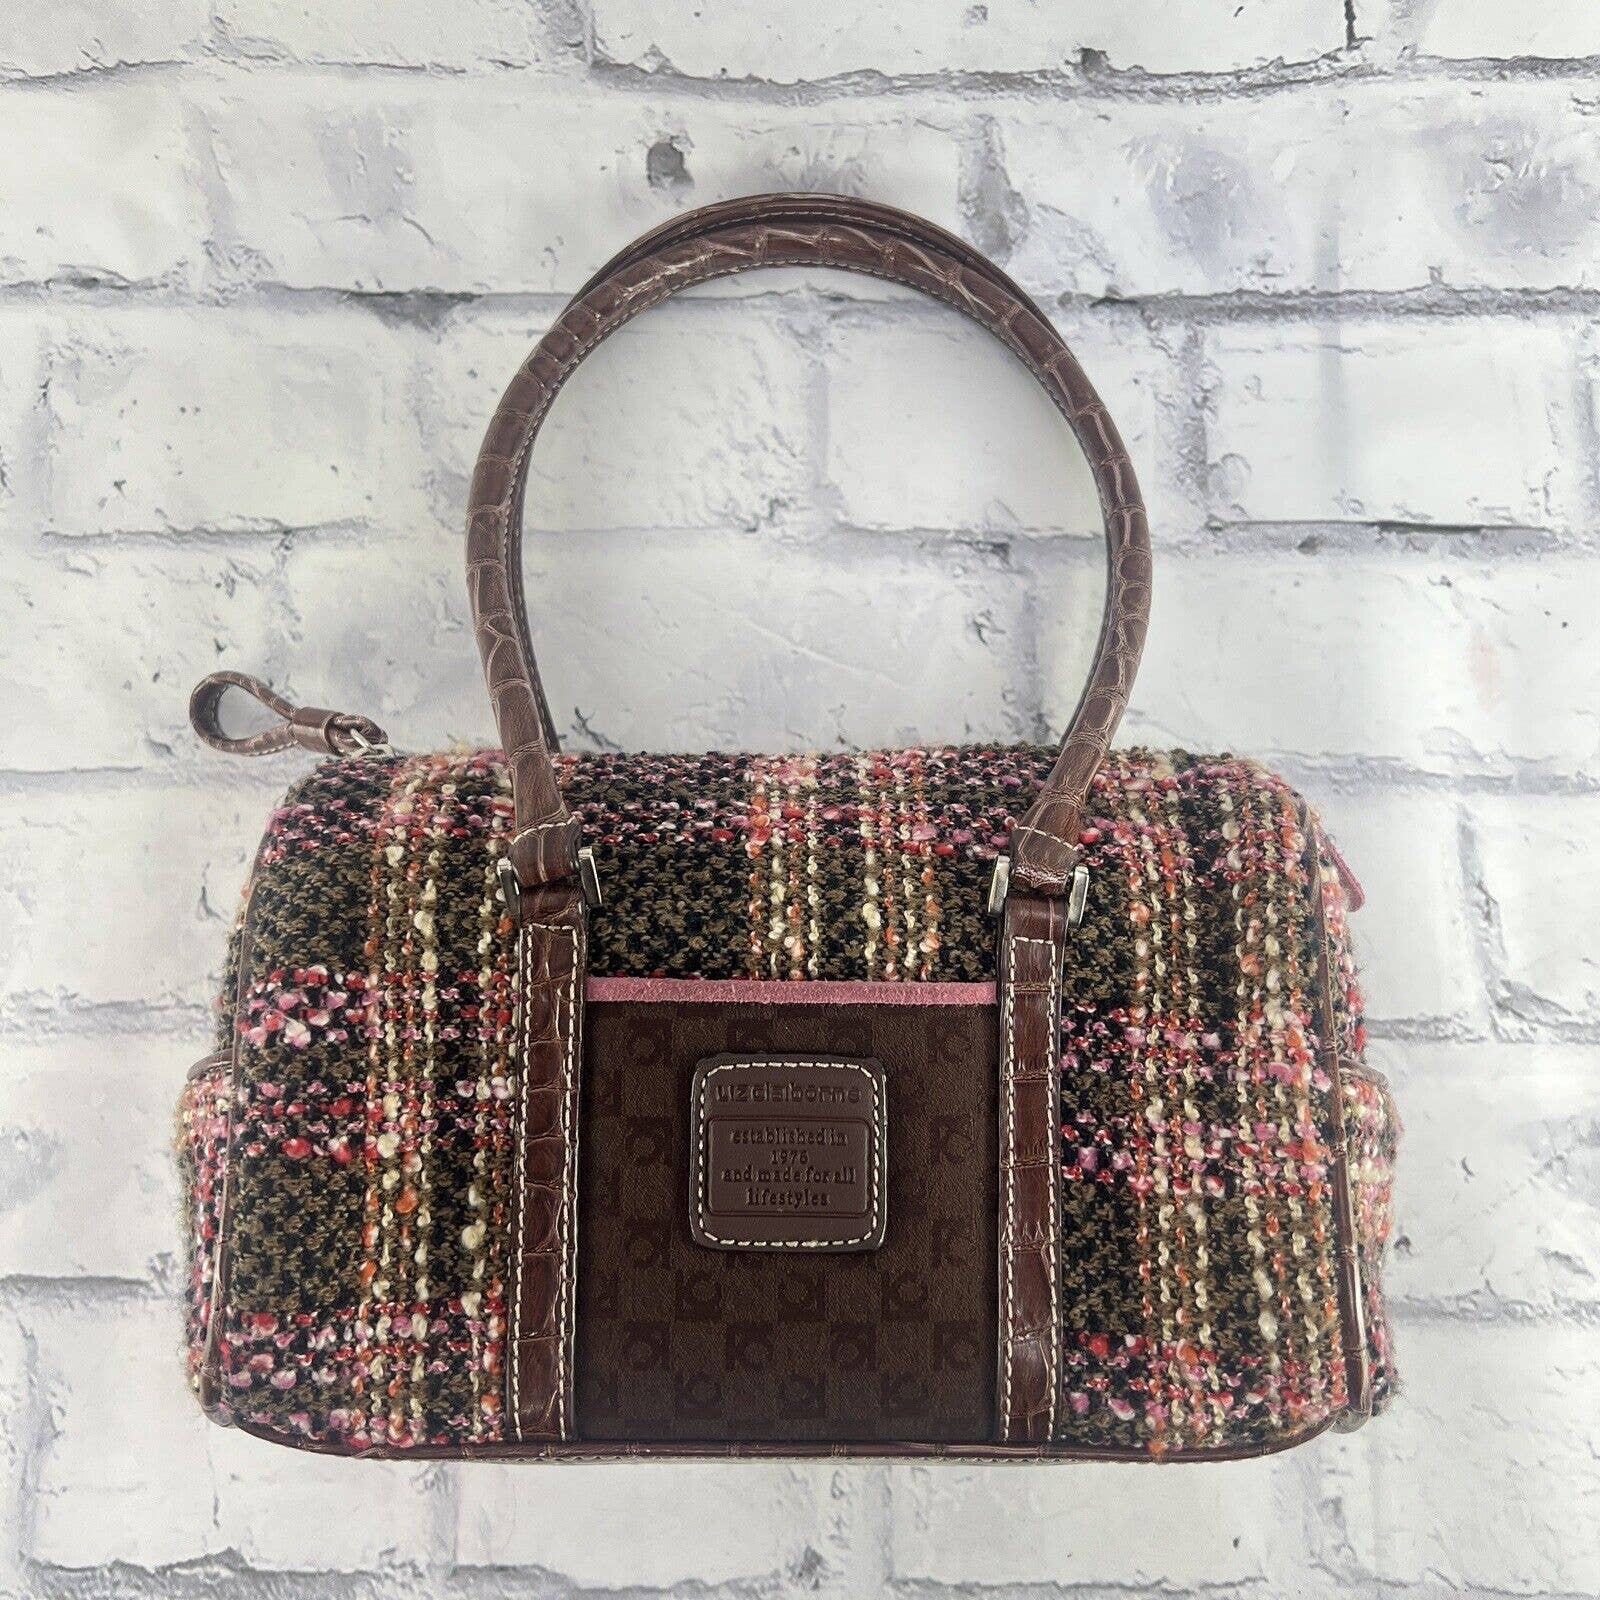 Liz Claiborne Tweed Purse Double Handle Small Leather Pink And Brown Bag